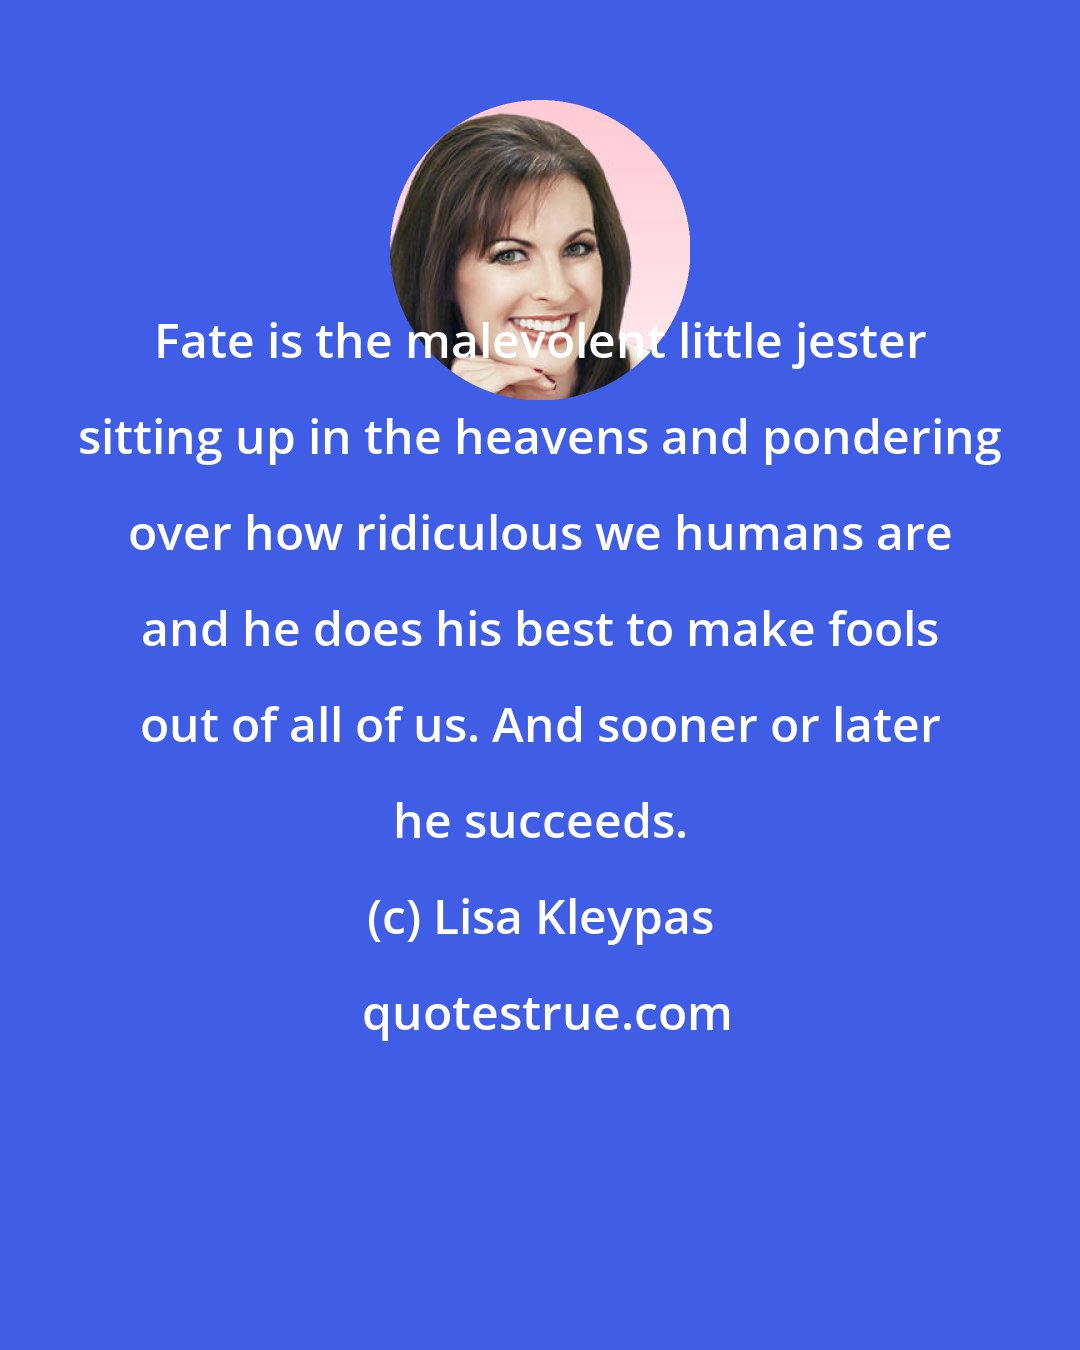 Lisa Kleypas: Fate is the malevolent little jester sitting up in the heavens and pondering over how ridiculous we humans are and he does his best to make fools out of all of us. And sooner or later he succeeds.